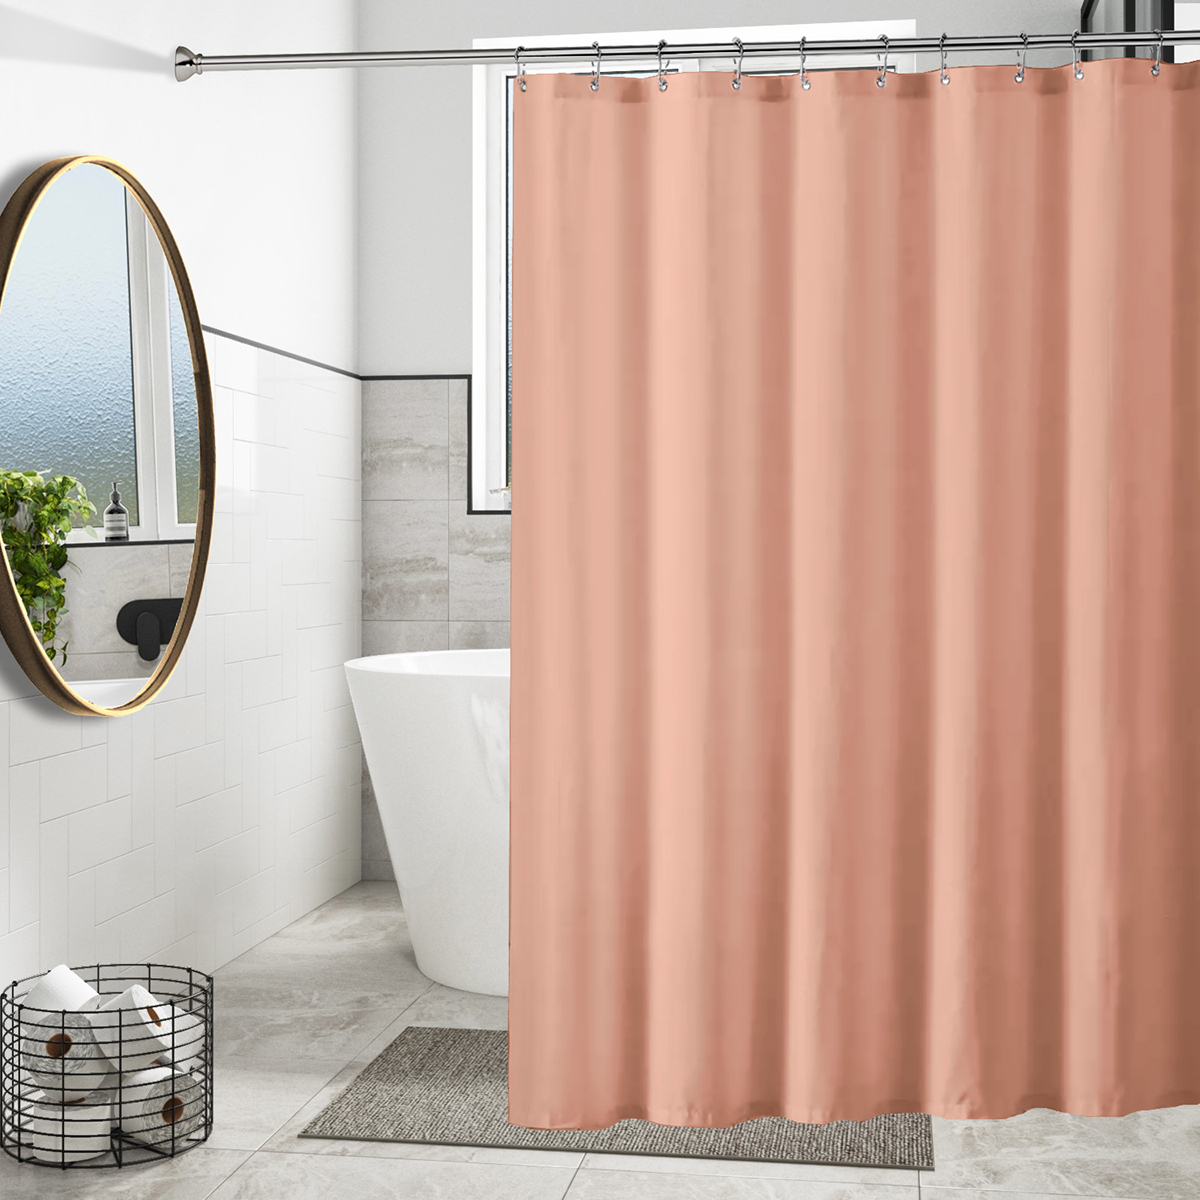 2-Pack Mildew Resistant Heavyweight Vinyl Shower Curtain Liner With Magnets Metal Grommets